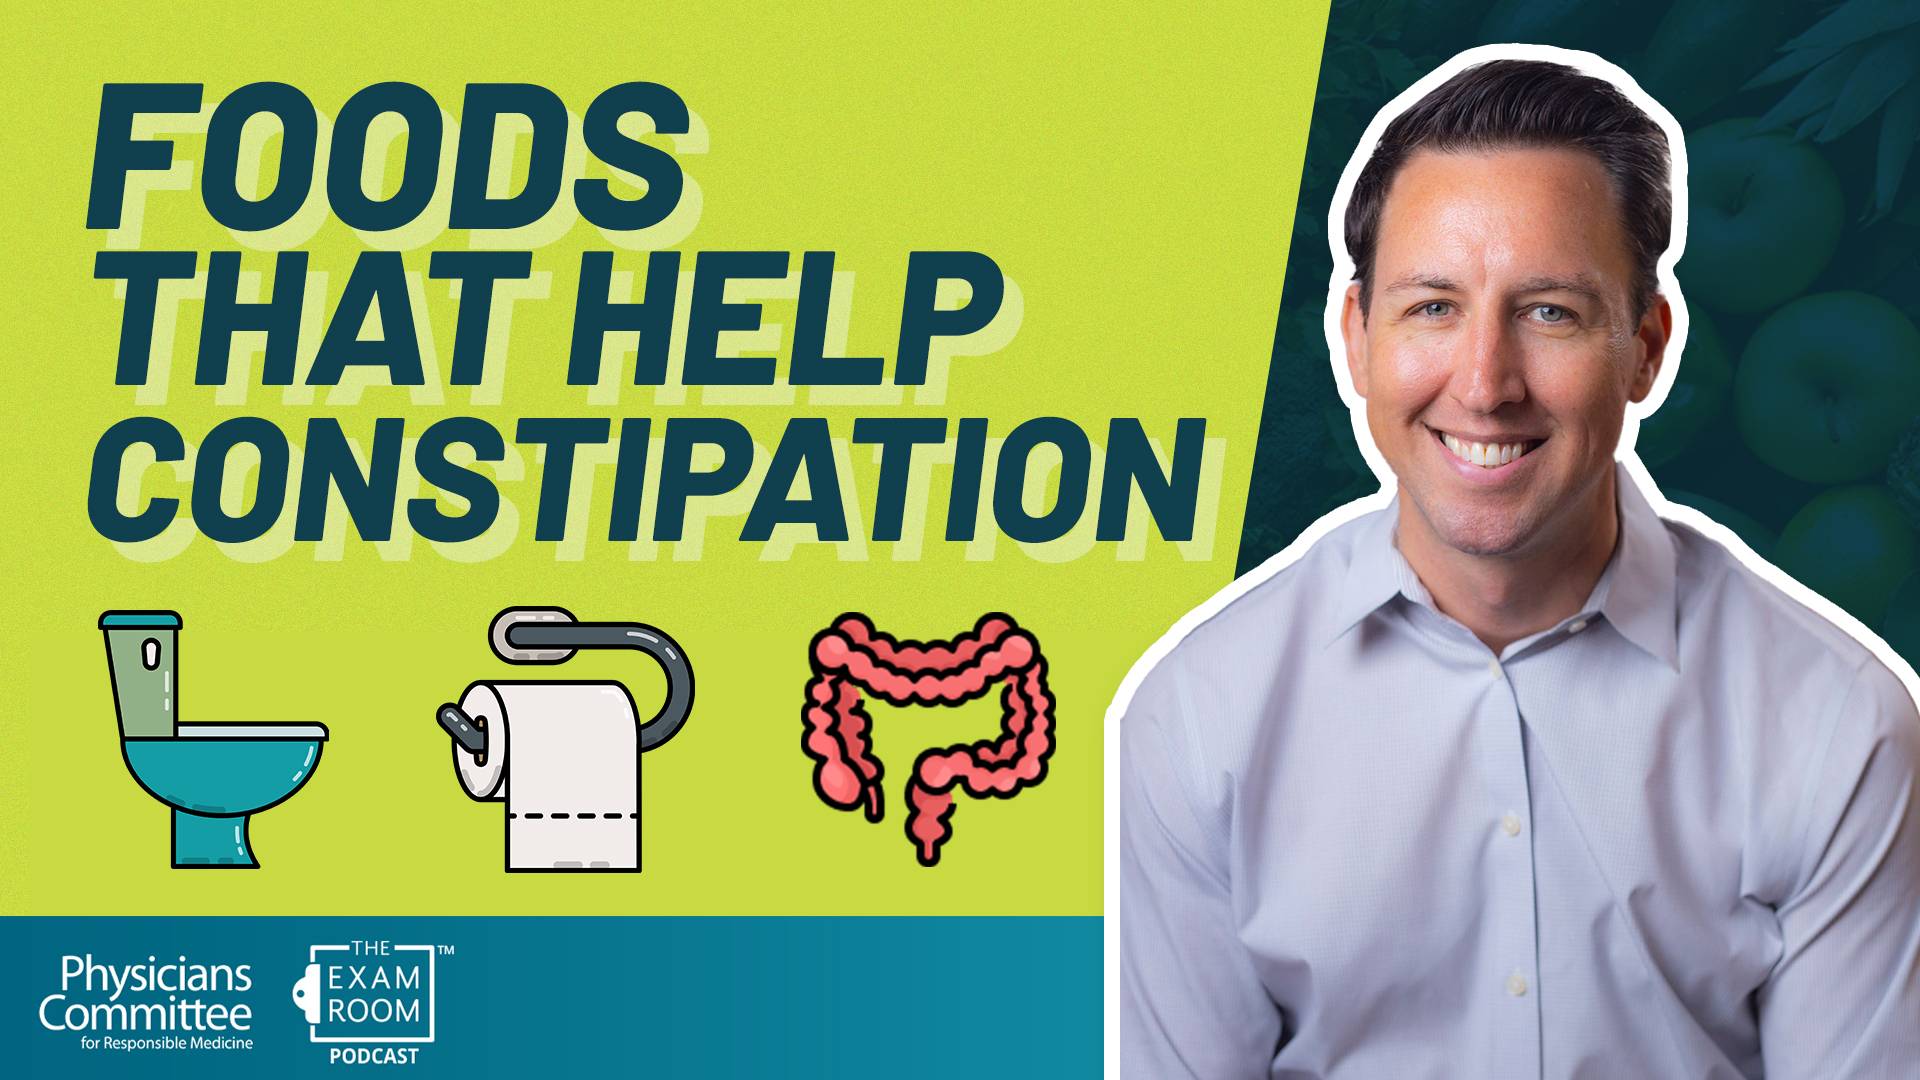 Foods That Help Constipation | Dr. Will Bulsiewicz Live Q&A